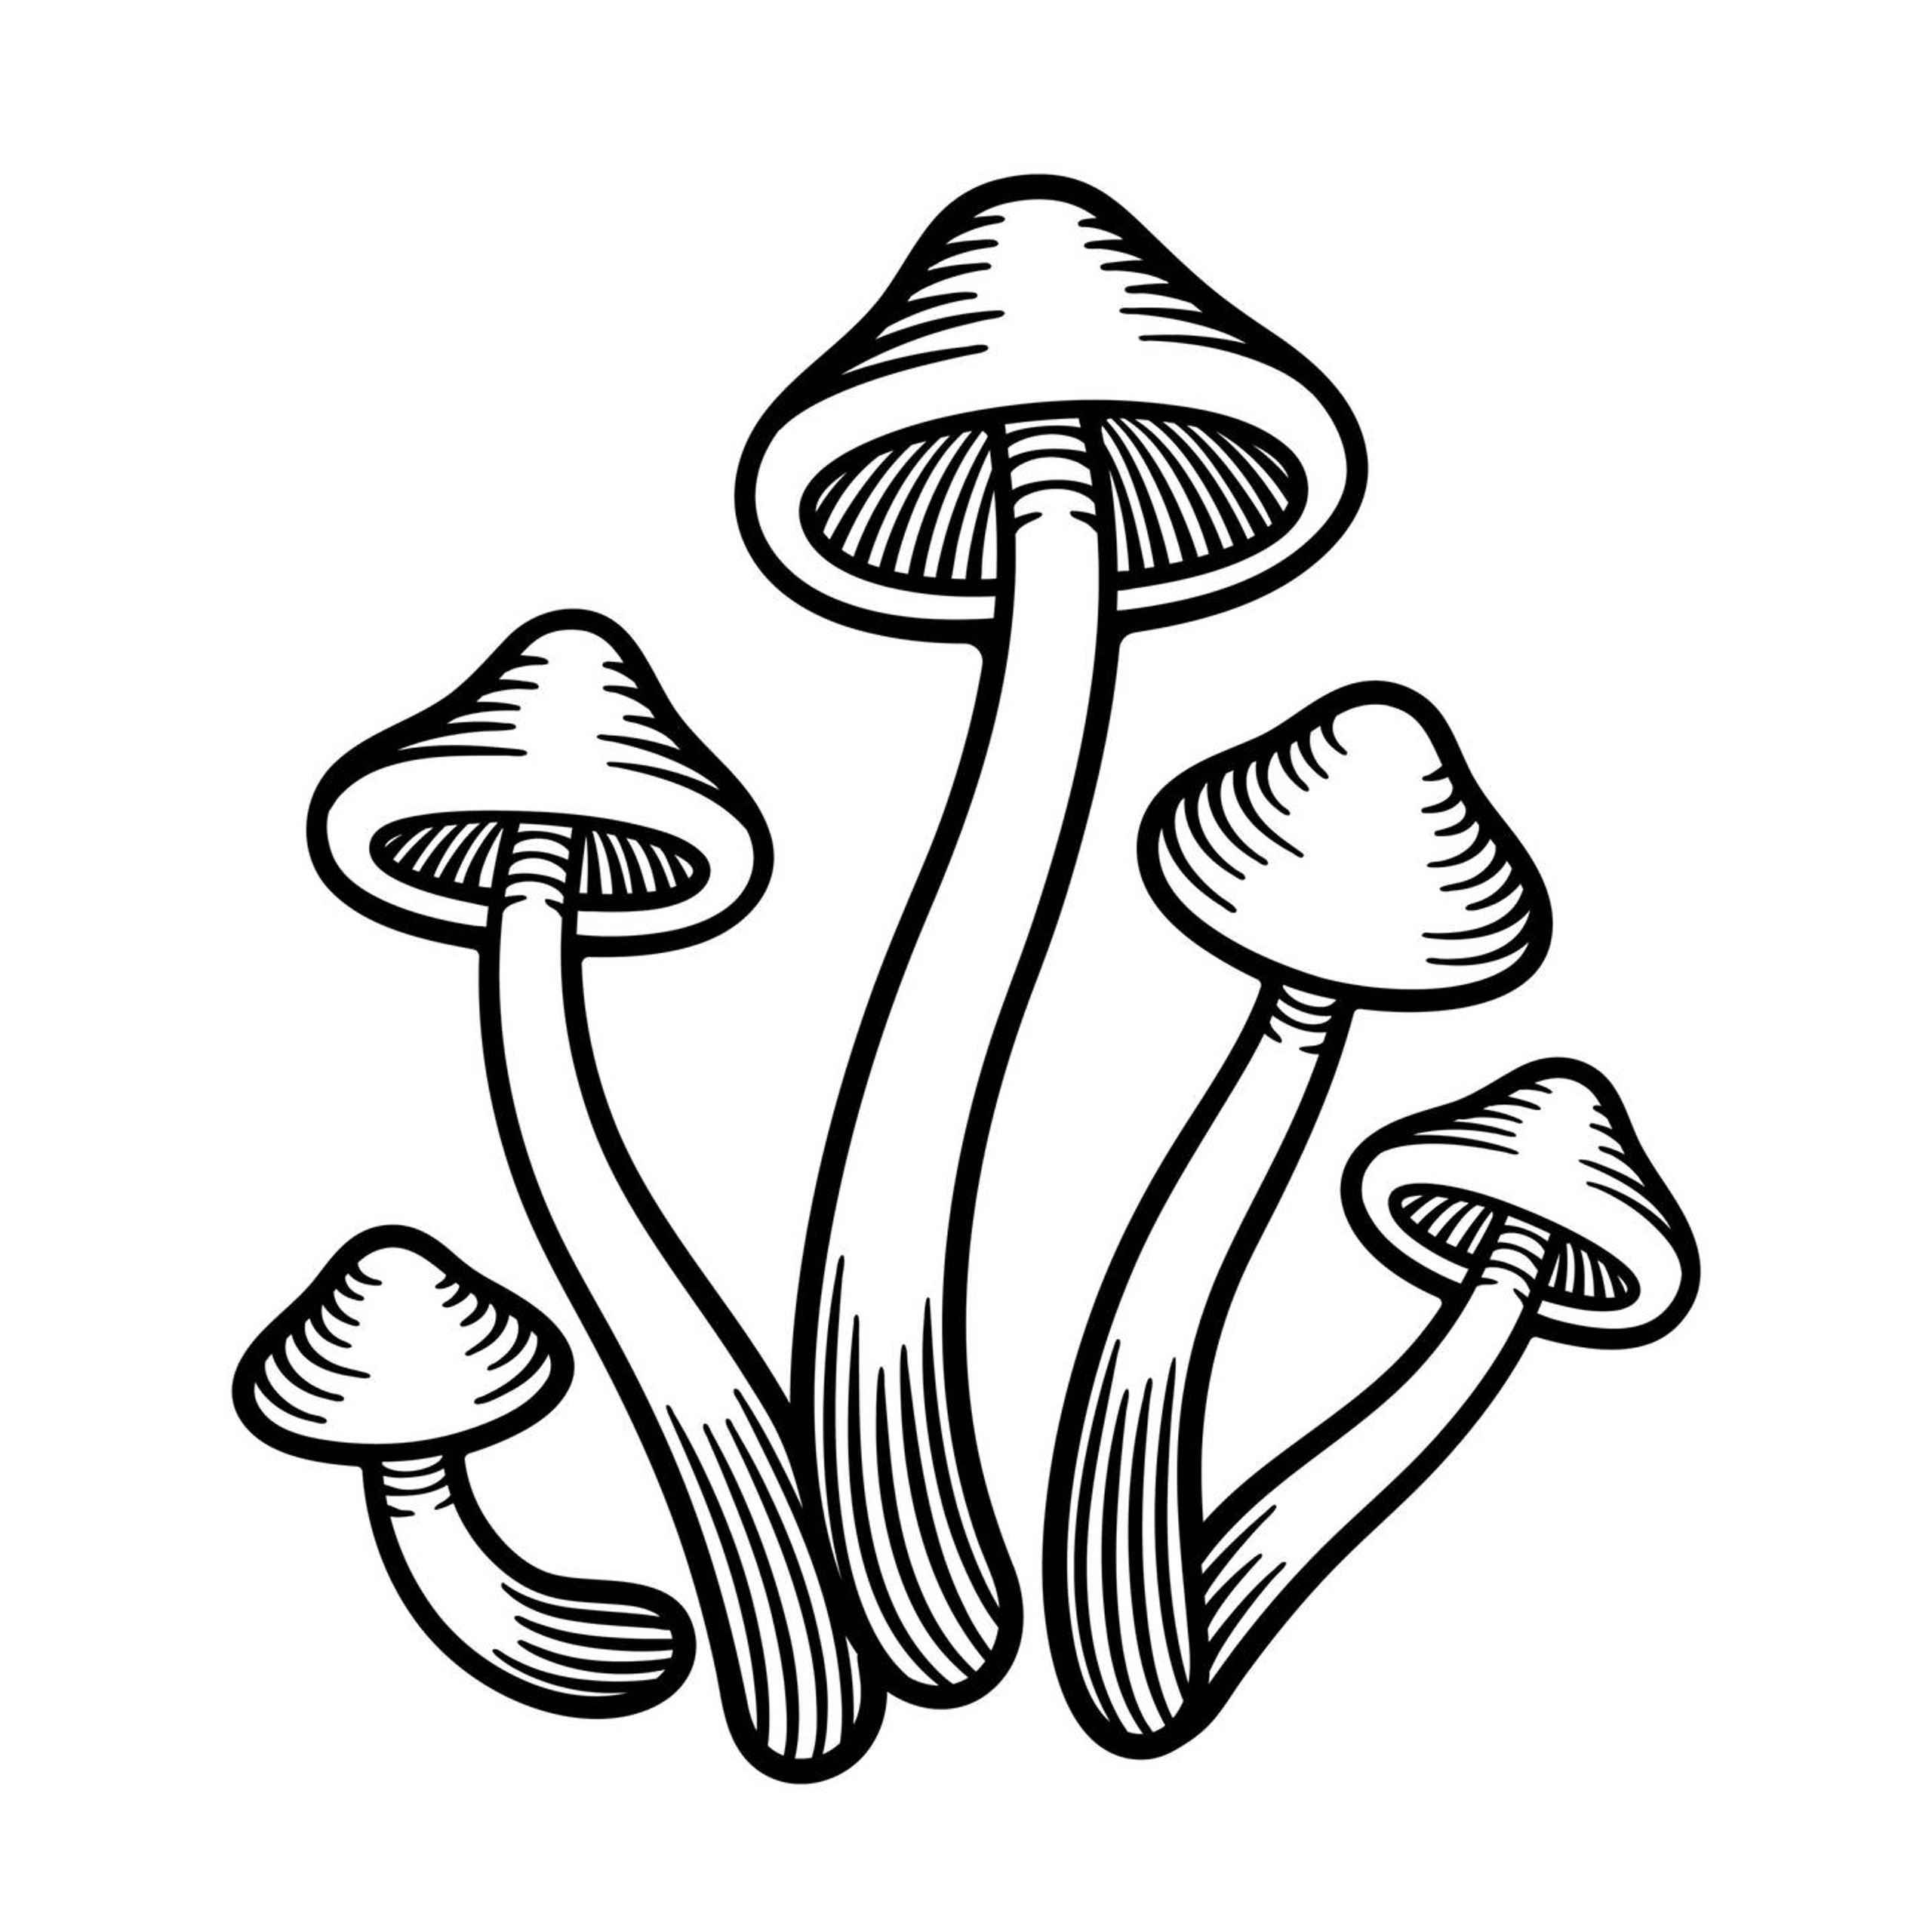 Black and white line drawing illustration of mushrooms. Psilocybin, psychedelics, Rewire, PBS